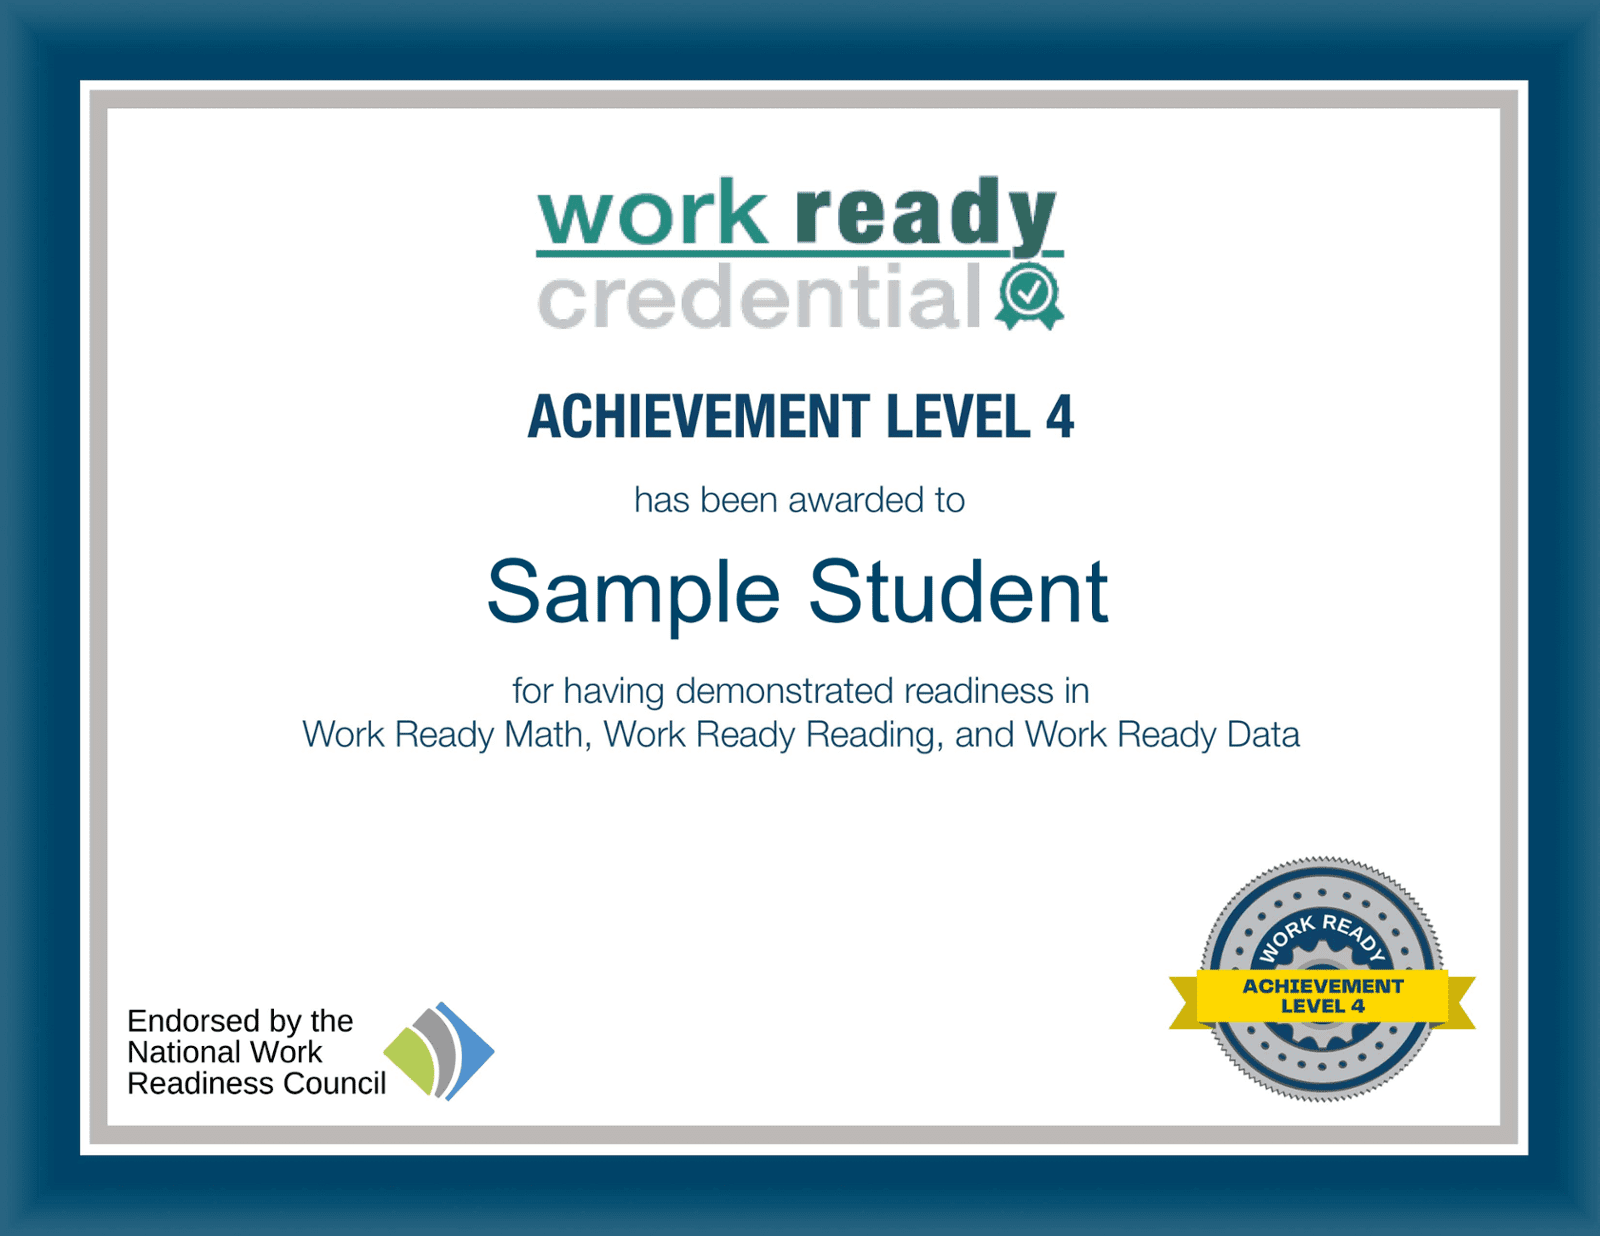 Ready to Work Credential Sample